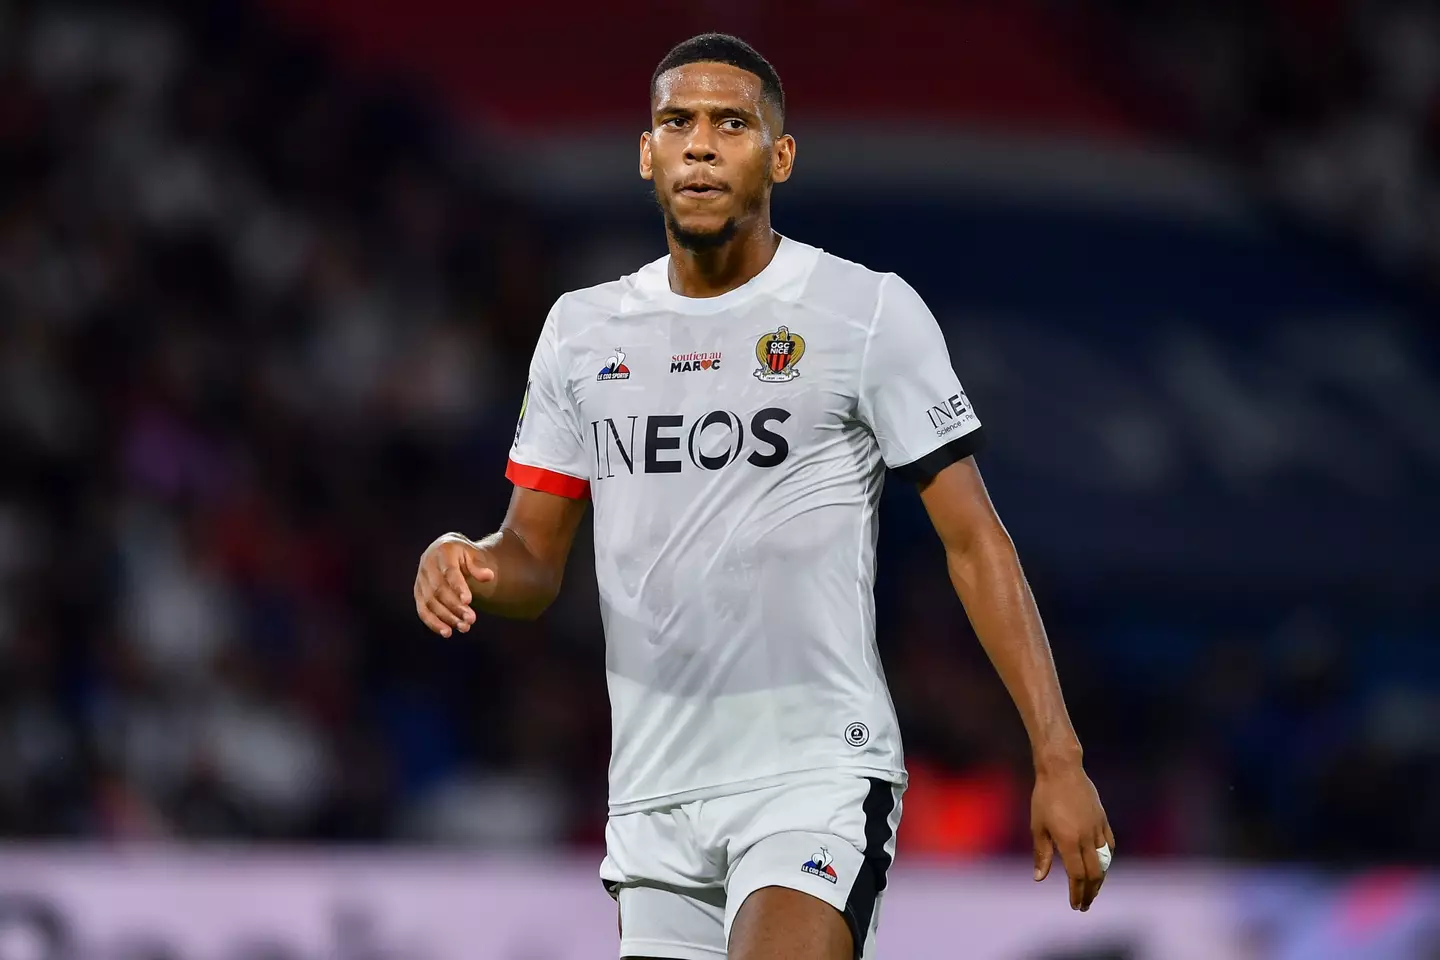 Jean-Clair Todibo said he 'didn't want to make the wrong choice' by transferring to Man United.